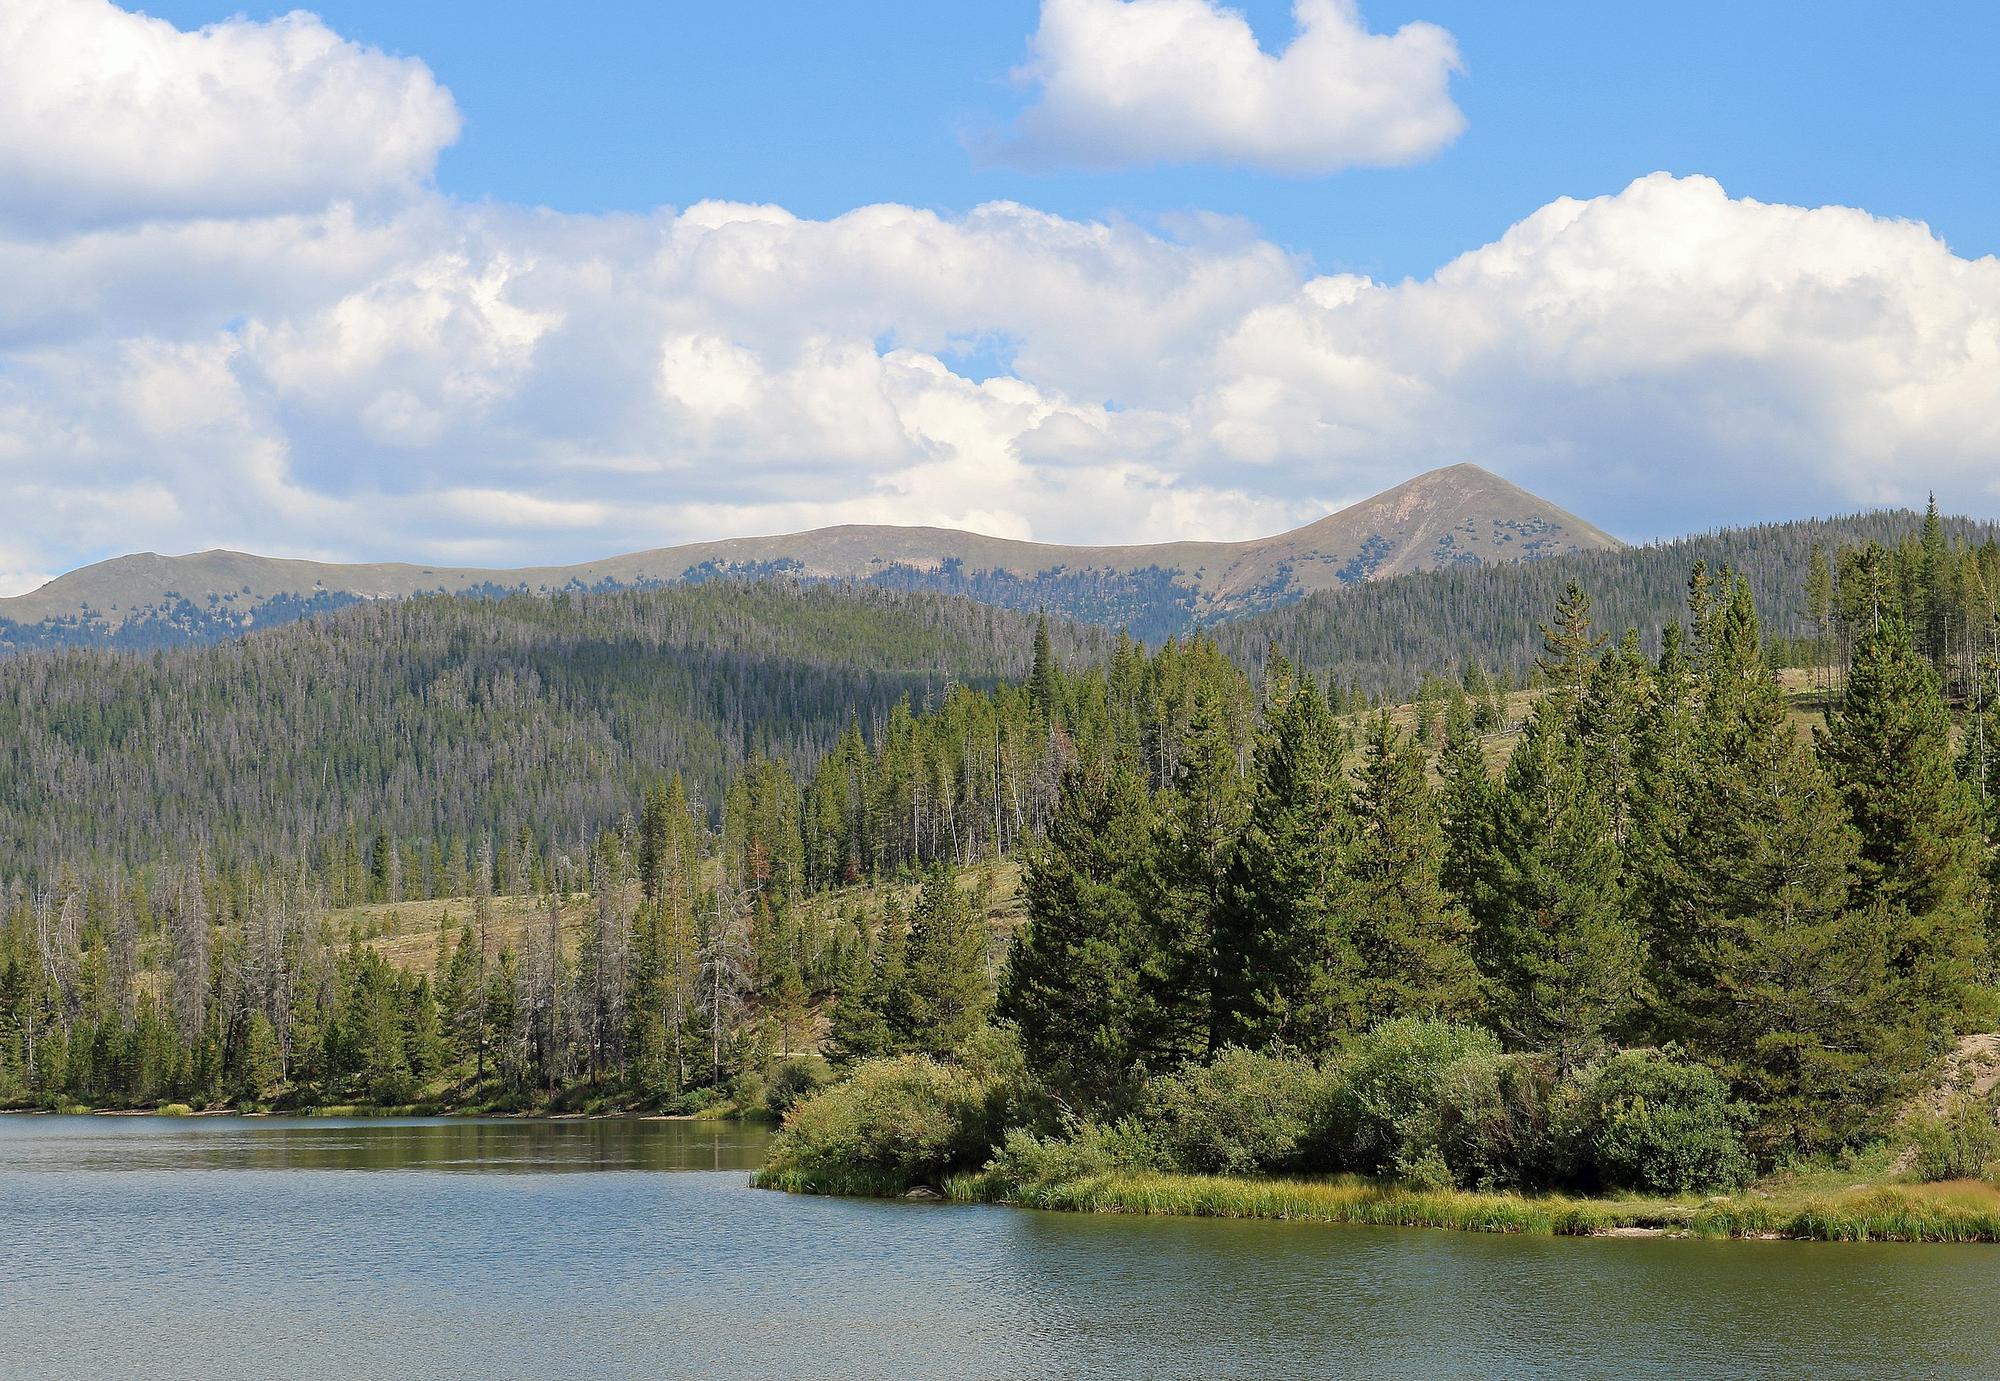 A calm lake meeting the shoreline of a forest that rises up into the mountains - North Park, Jackson County Colorado